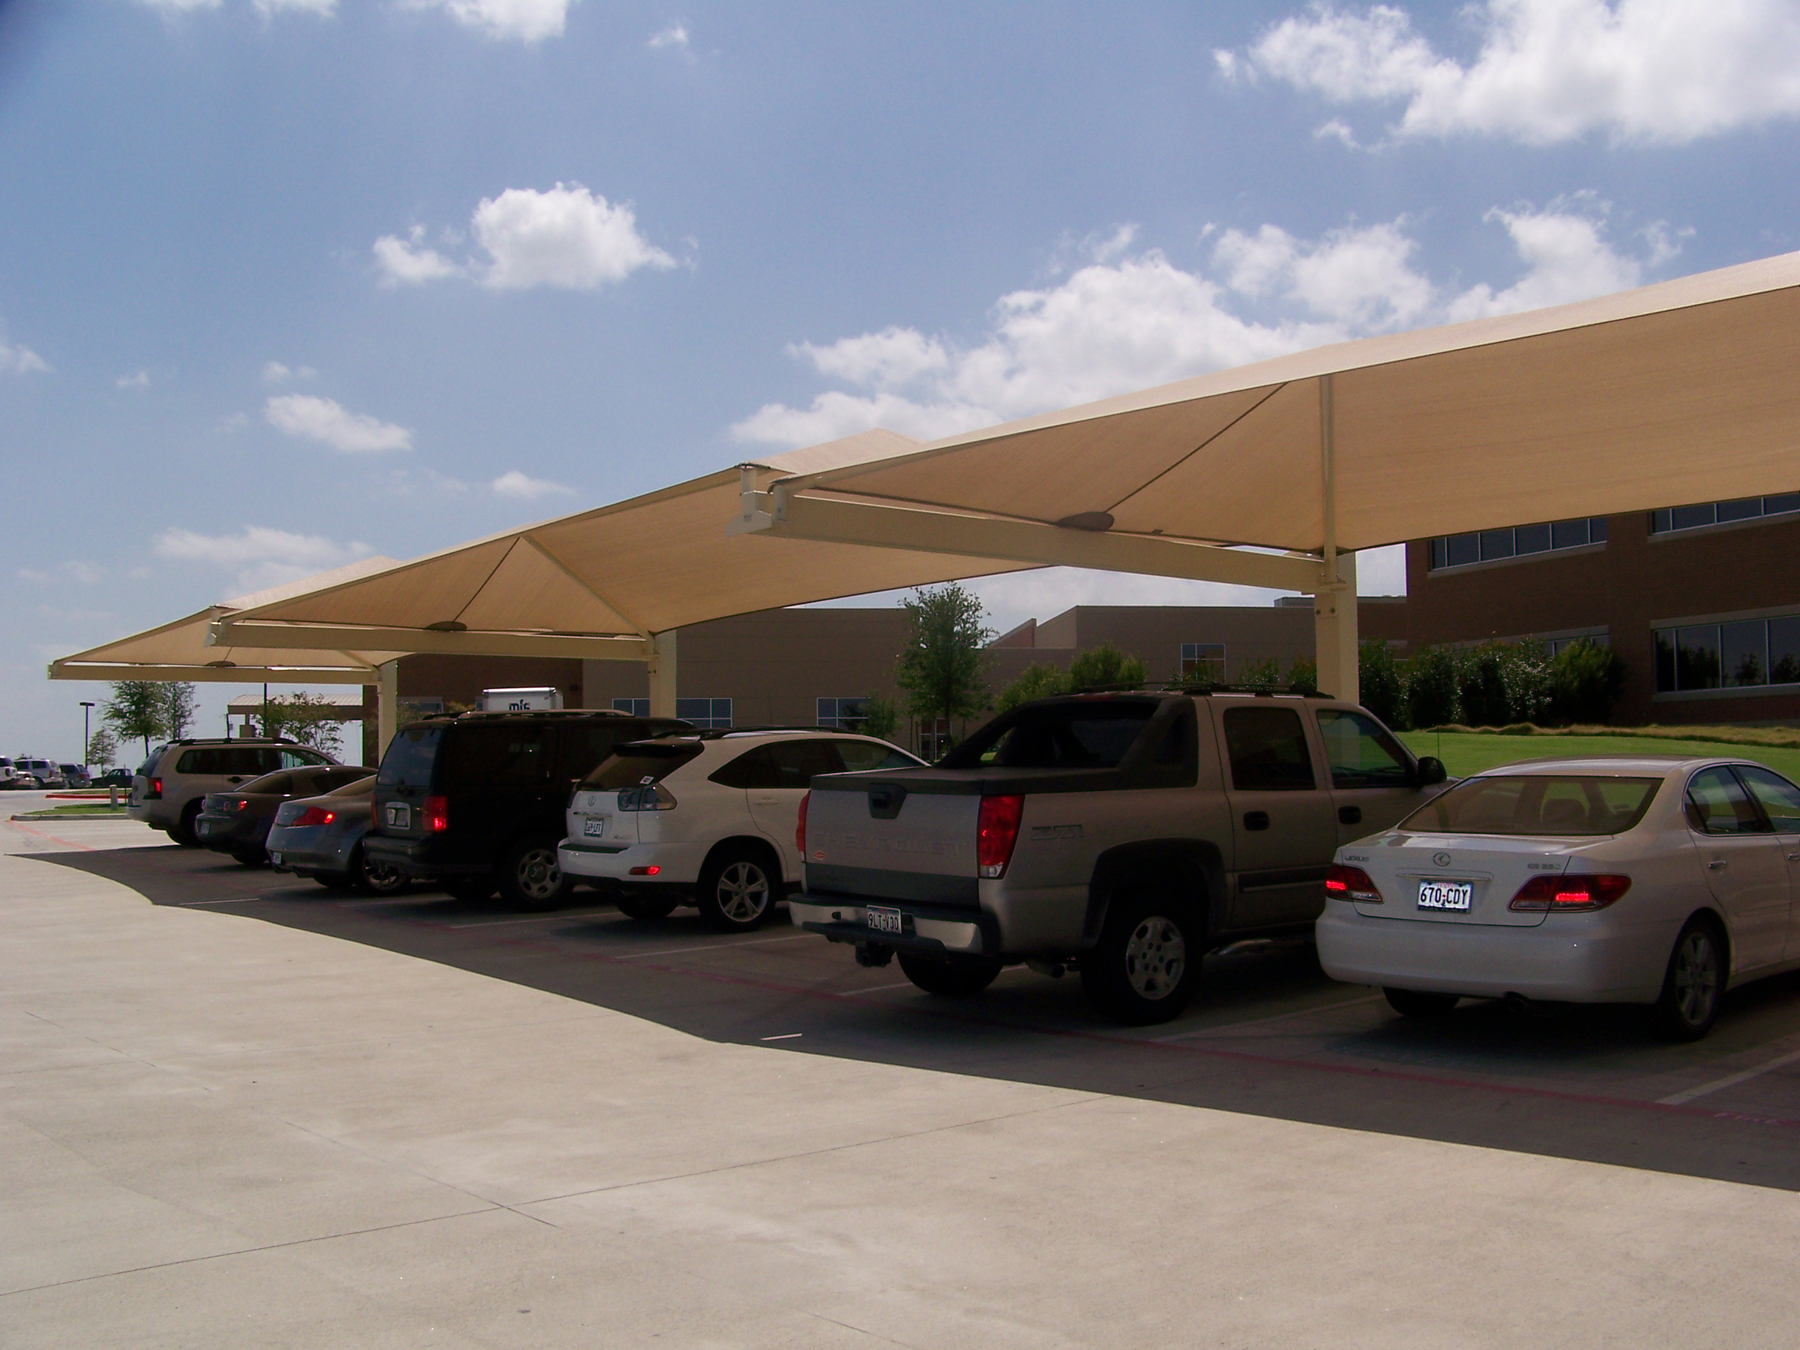 cars parked in outdoor spots under usa shades